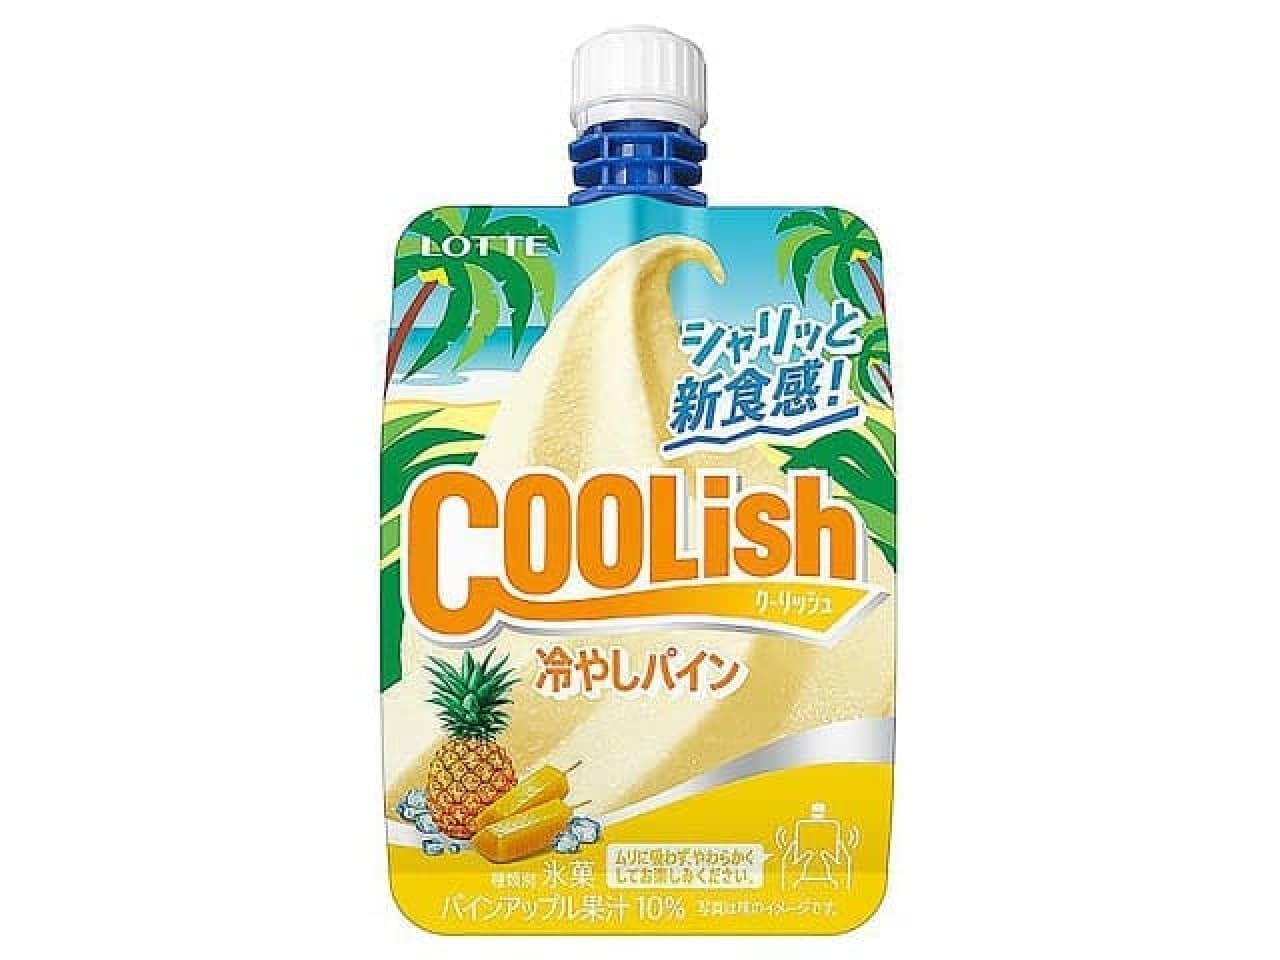 Ice Cream "Lotte Coolish Chilled Pineapple